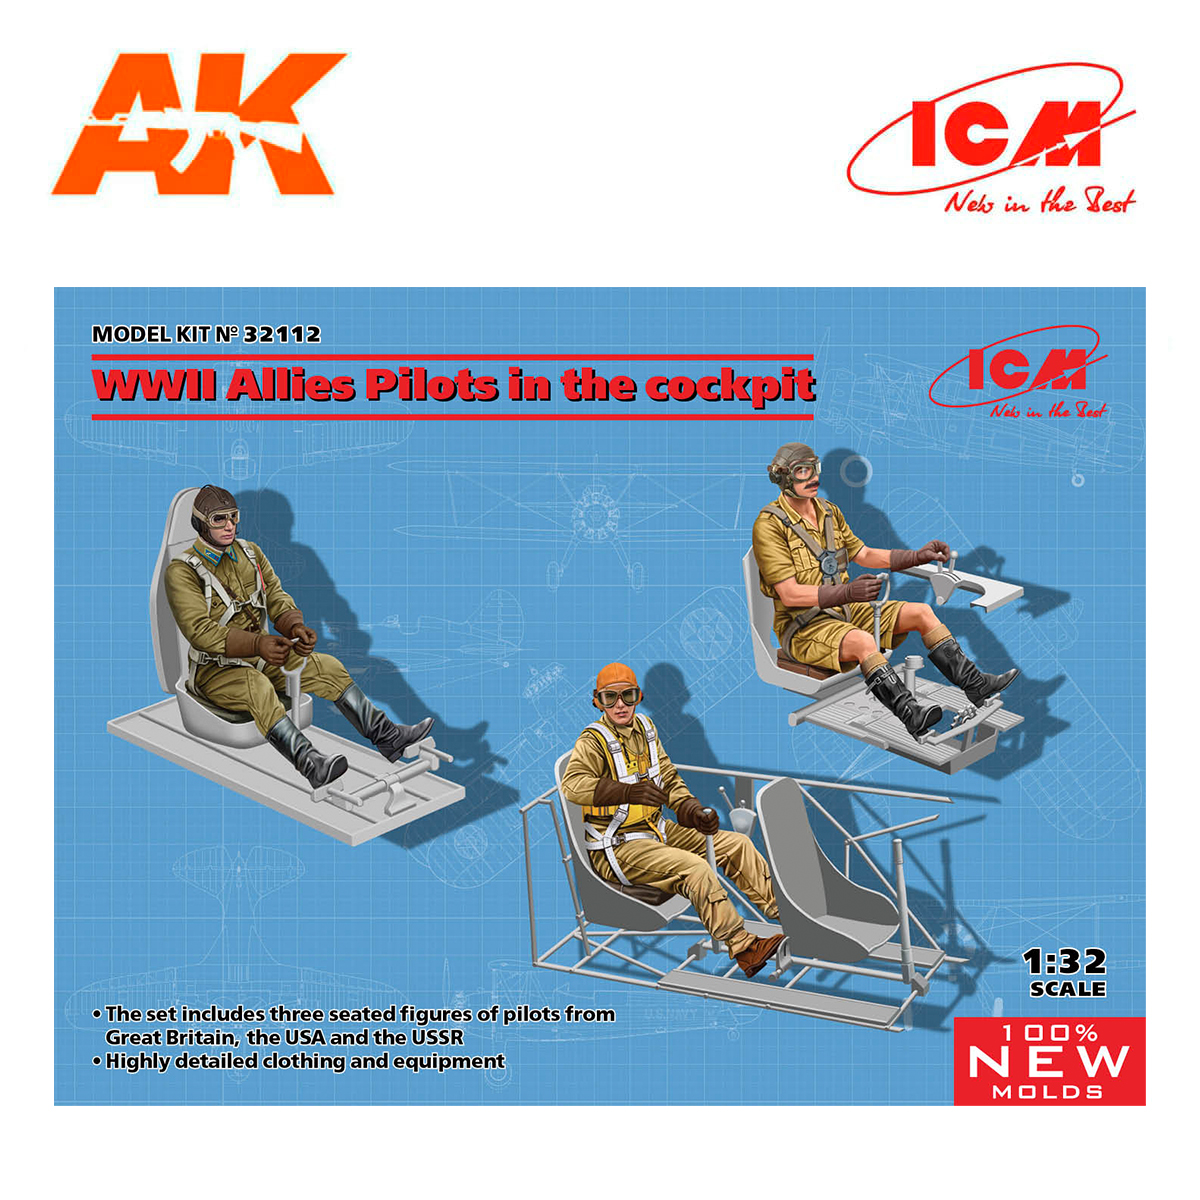 WWII Allies Pilots in the cockpit (British, American, Soviet) (100% new molds) 1/32